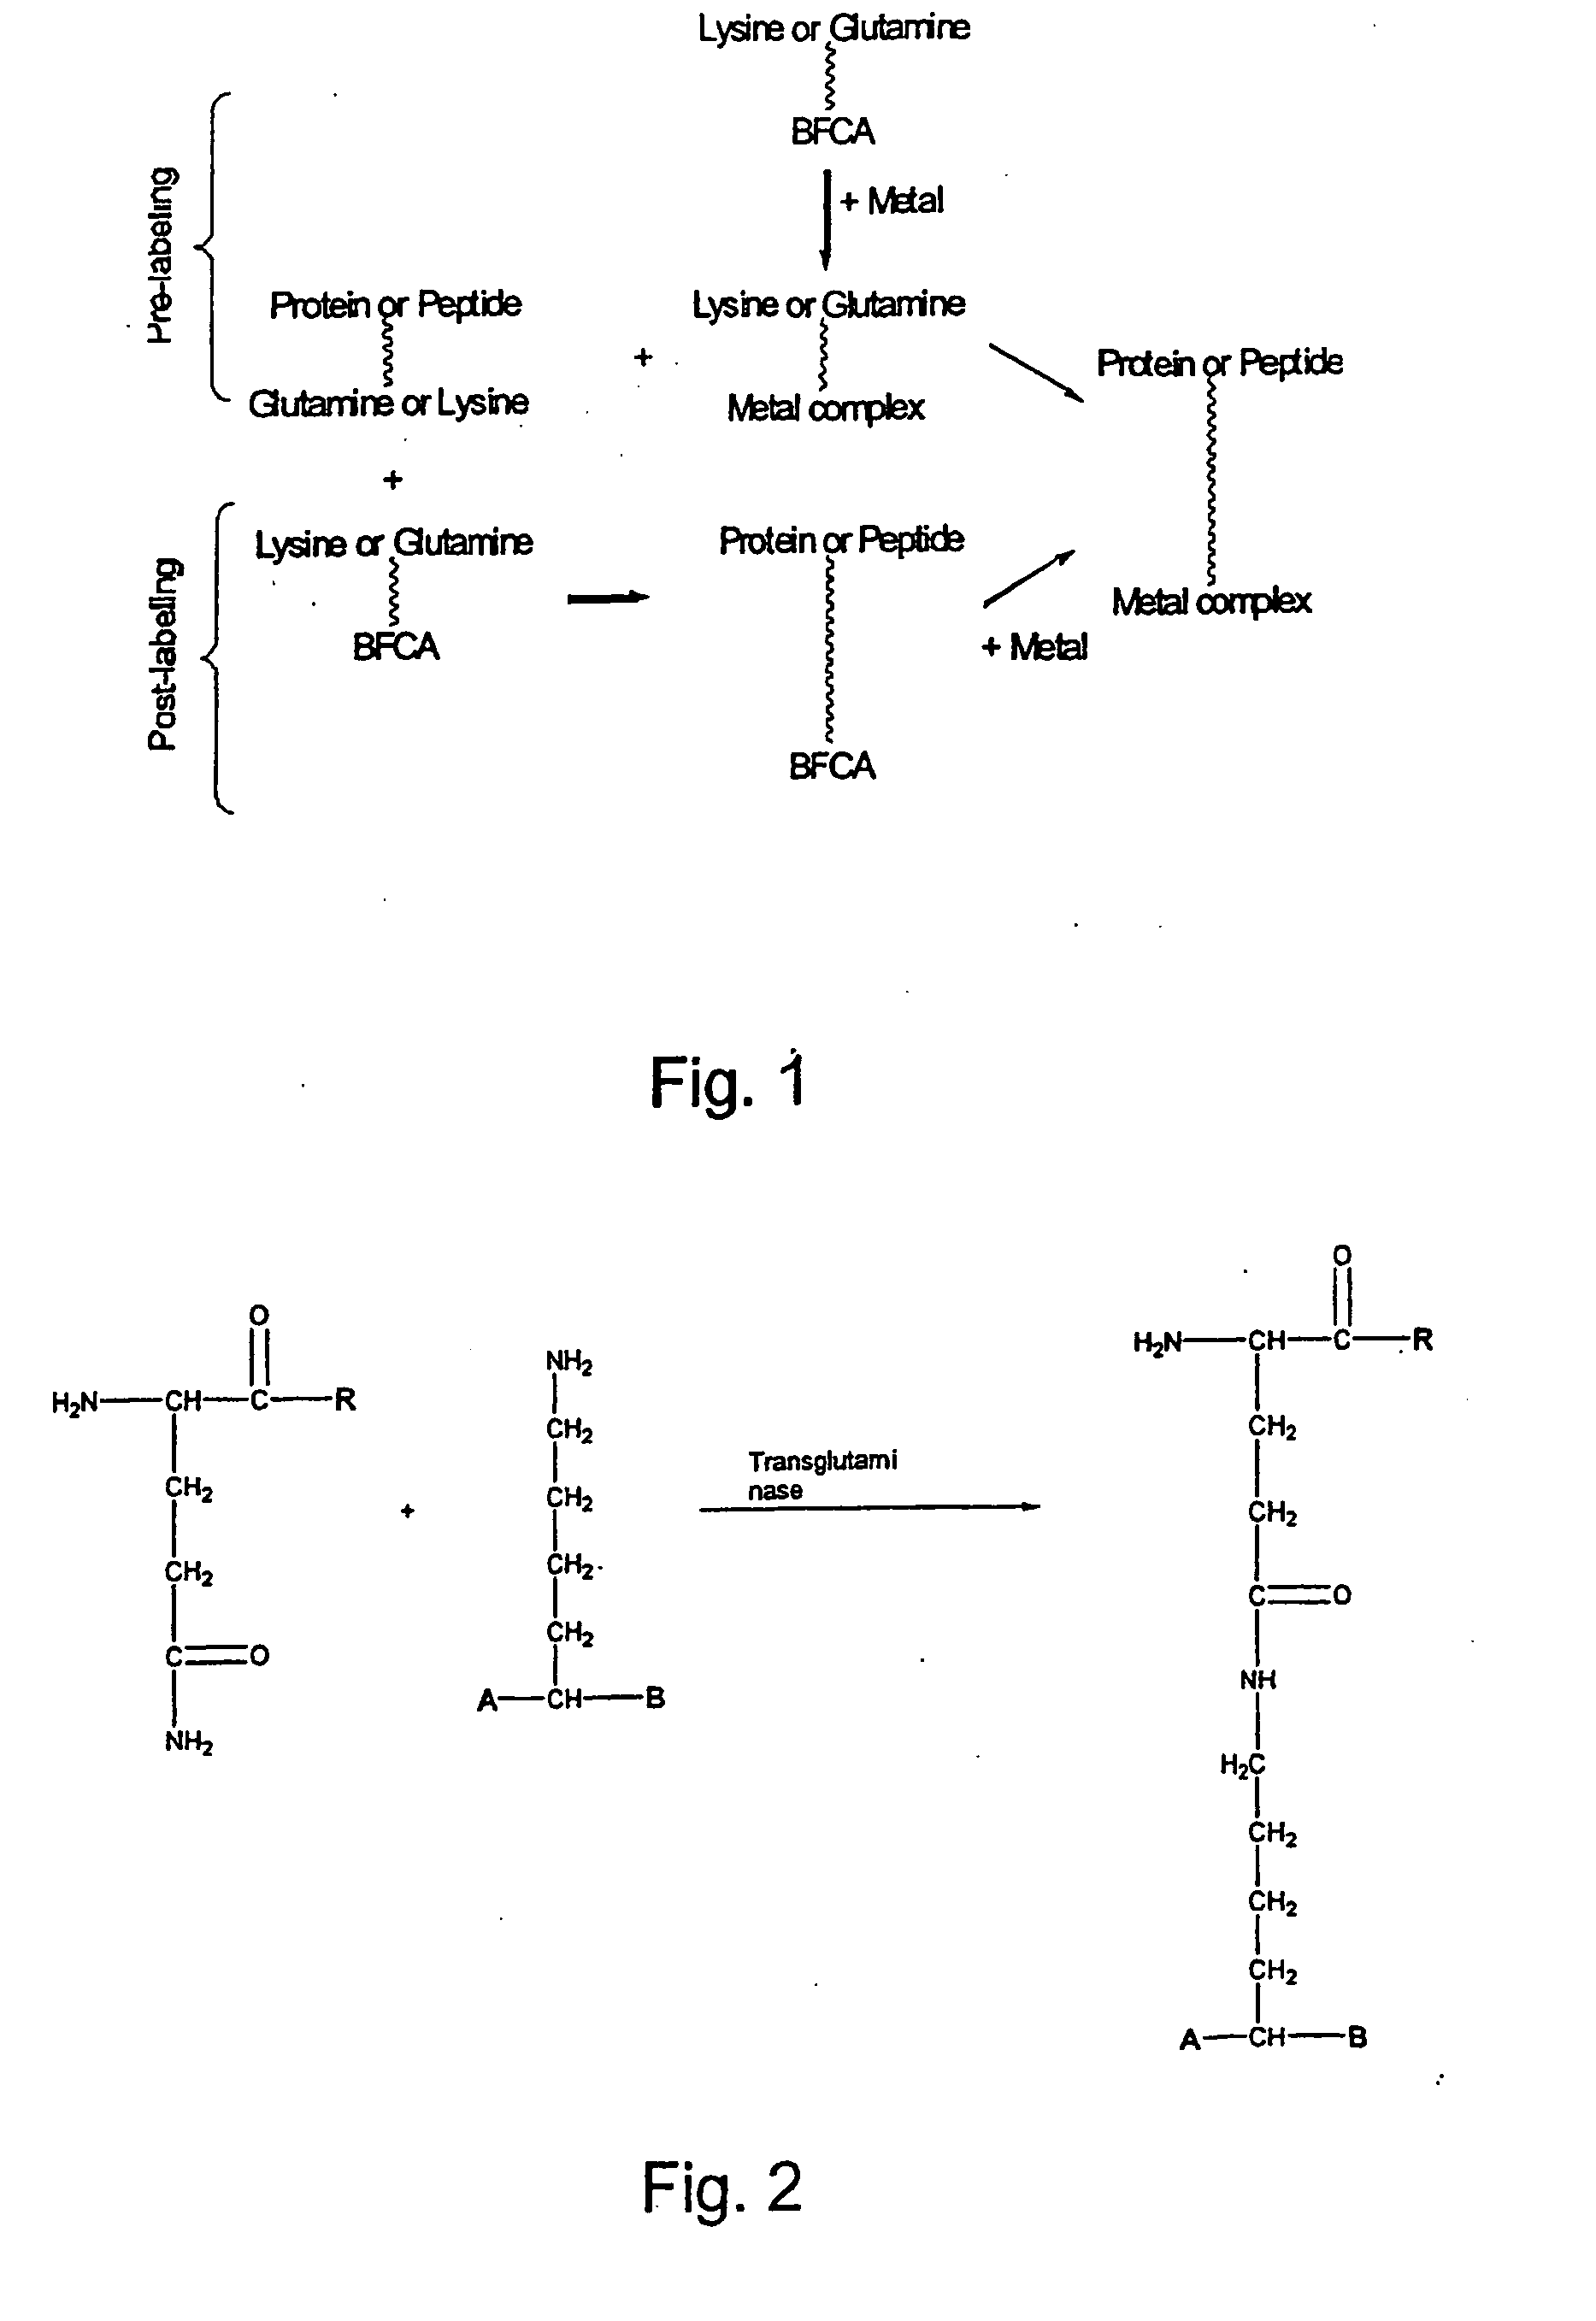 Method for the linkage of bifunctional chelating agents and (radioactive) transition metal complexes to proteins and peptides